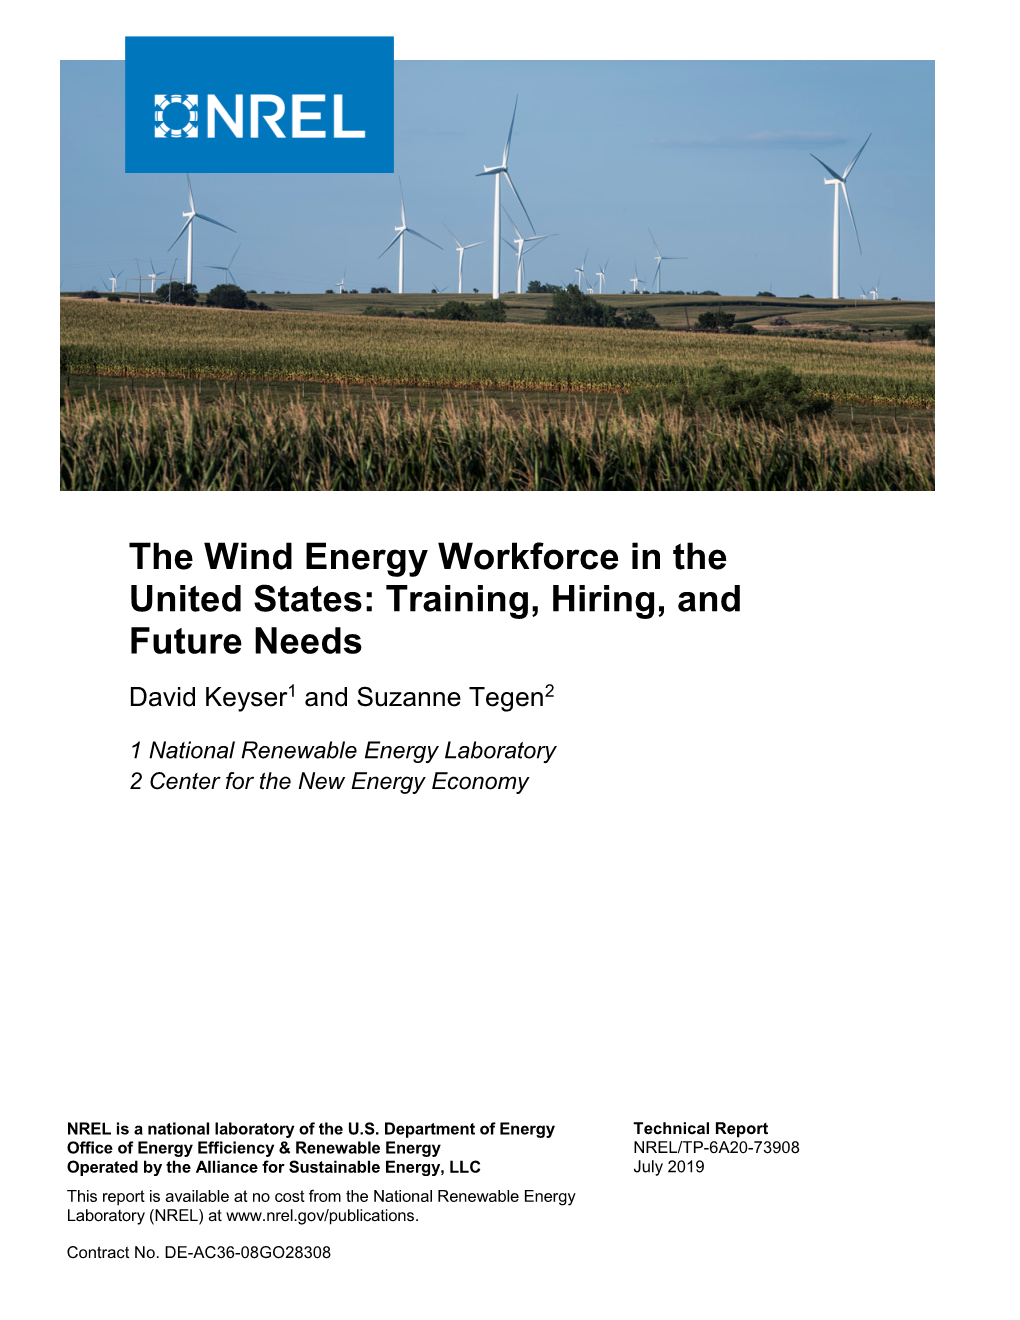 The Wind Energy Workforce in the United States: Training, Hiring, and Future Needs